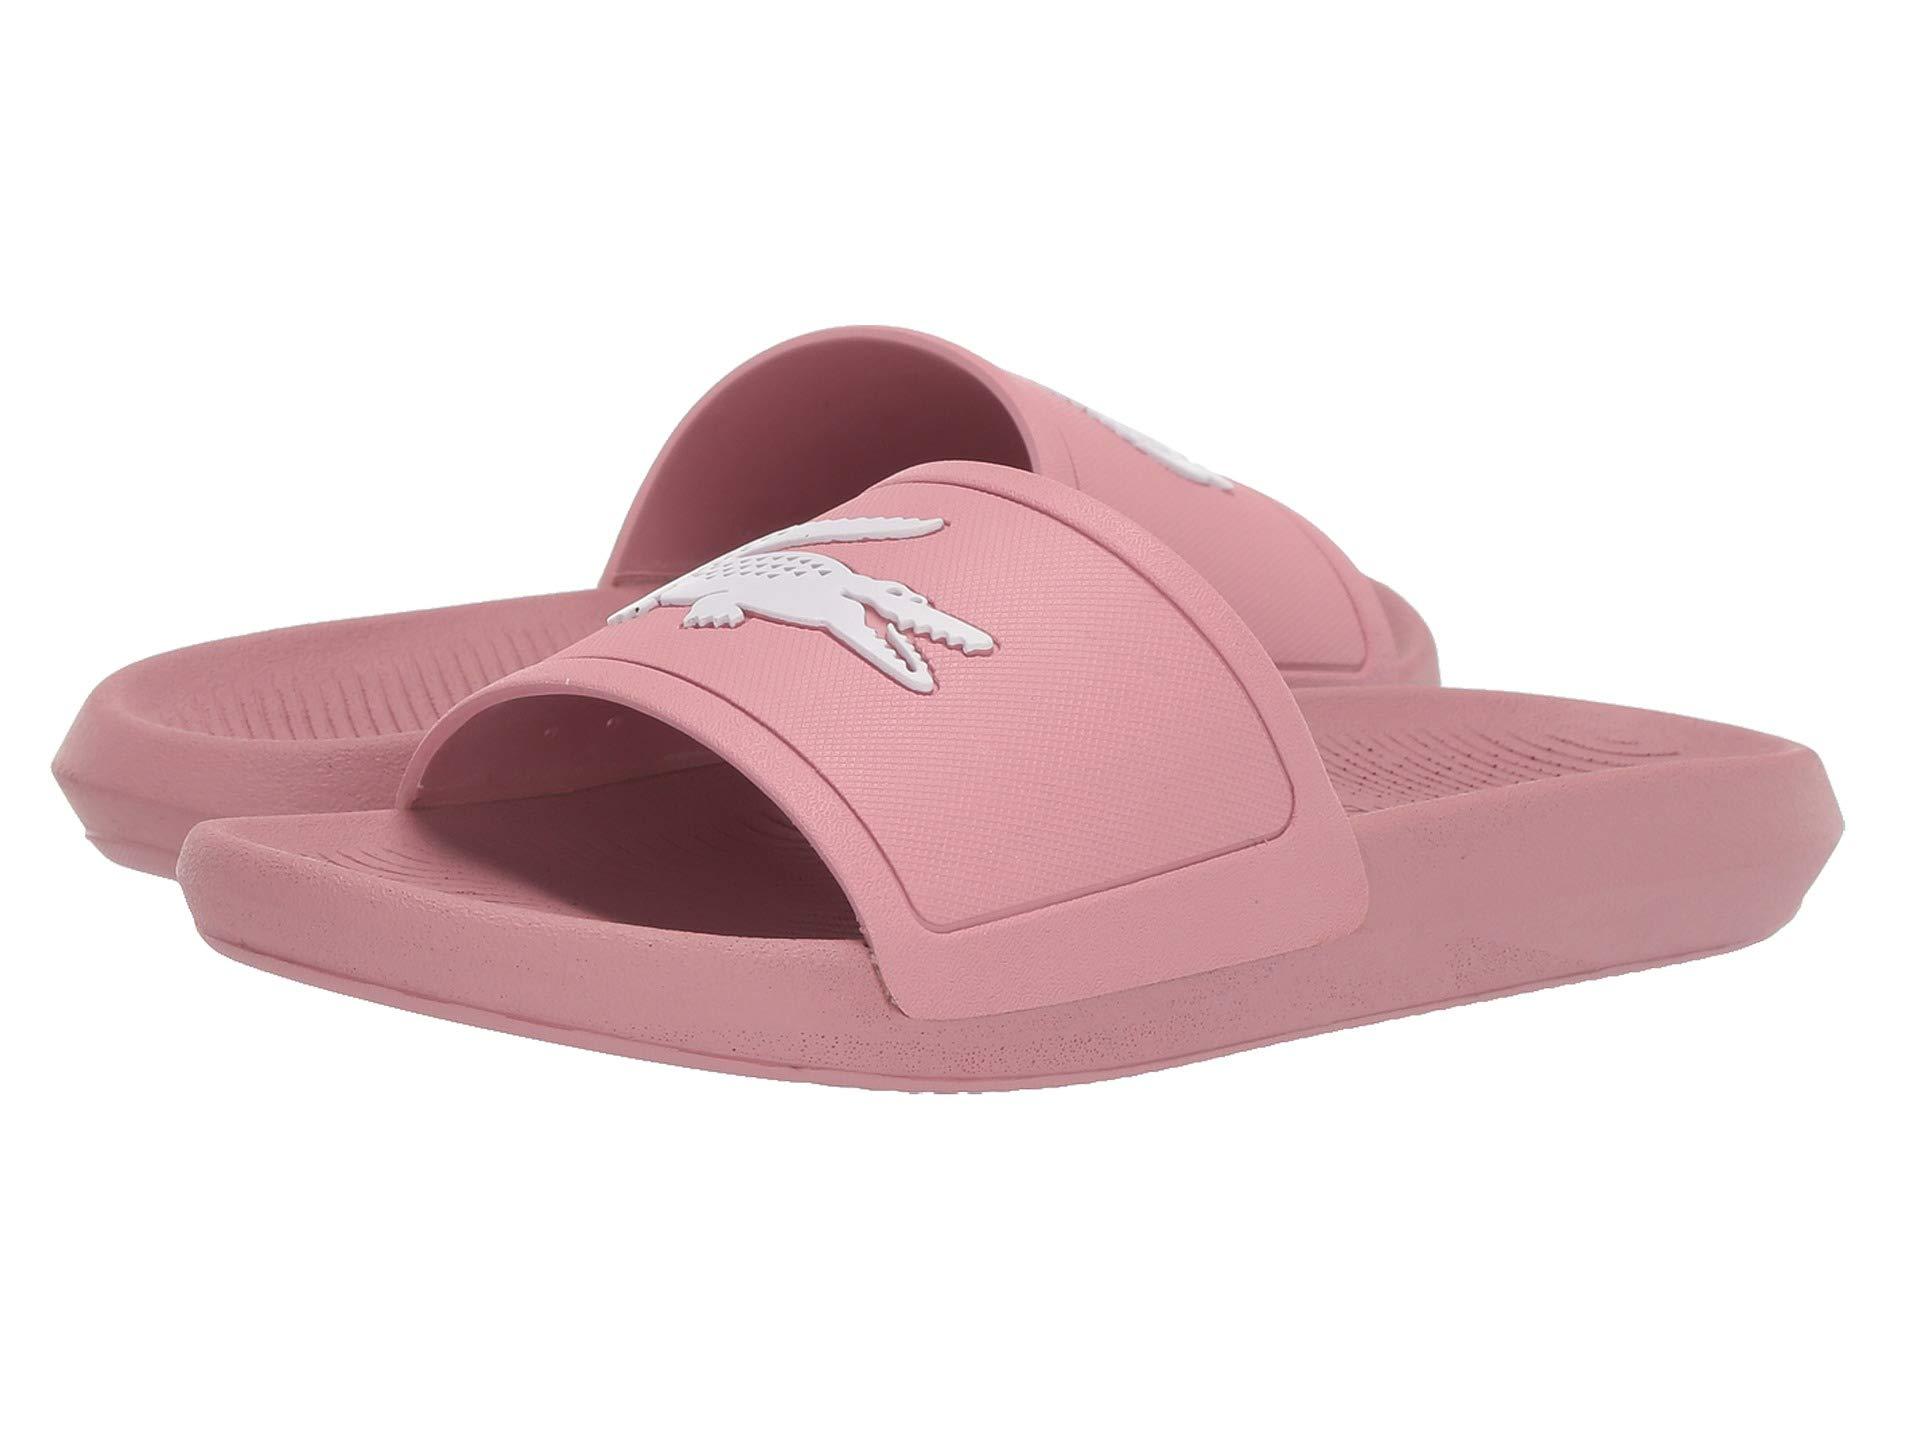 Lacoste Synthetic Croco Slide 319 1 in 